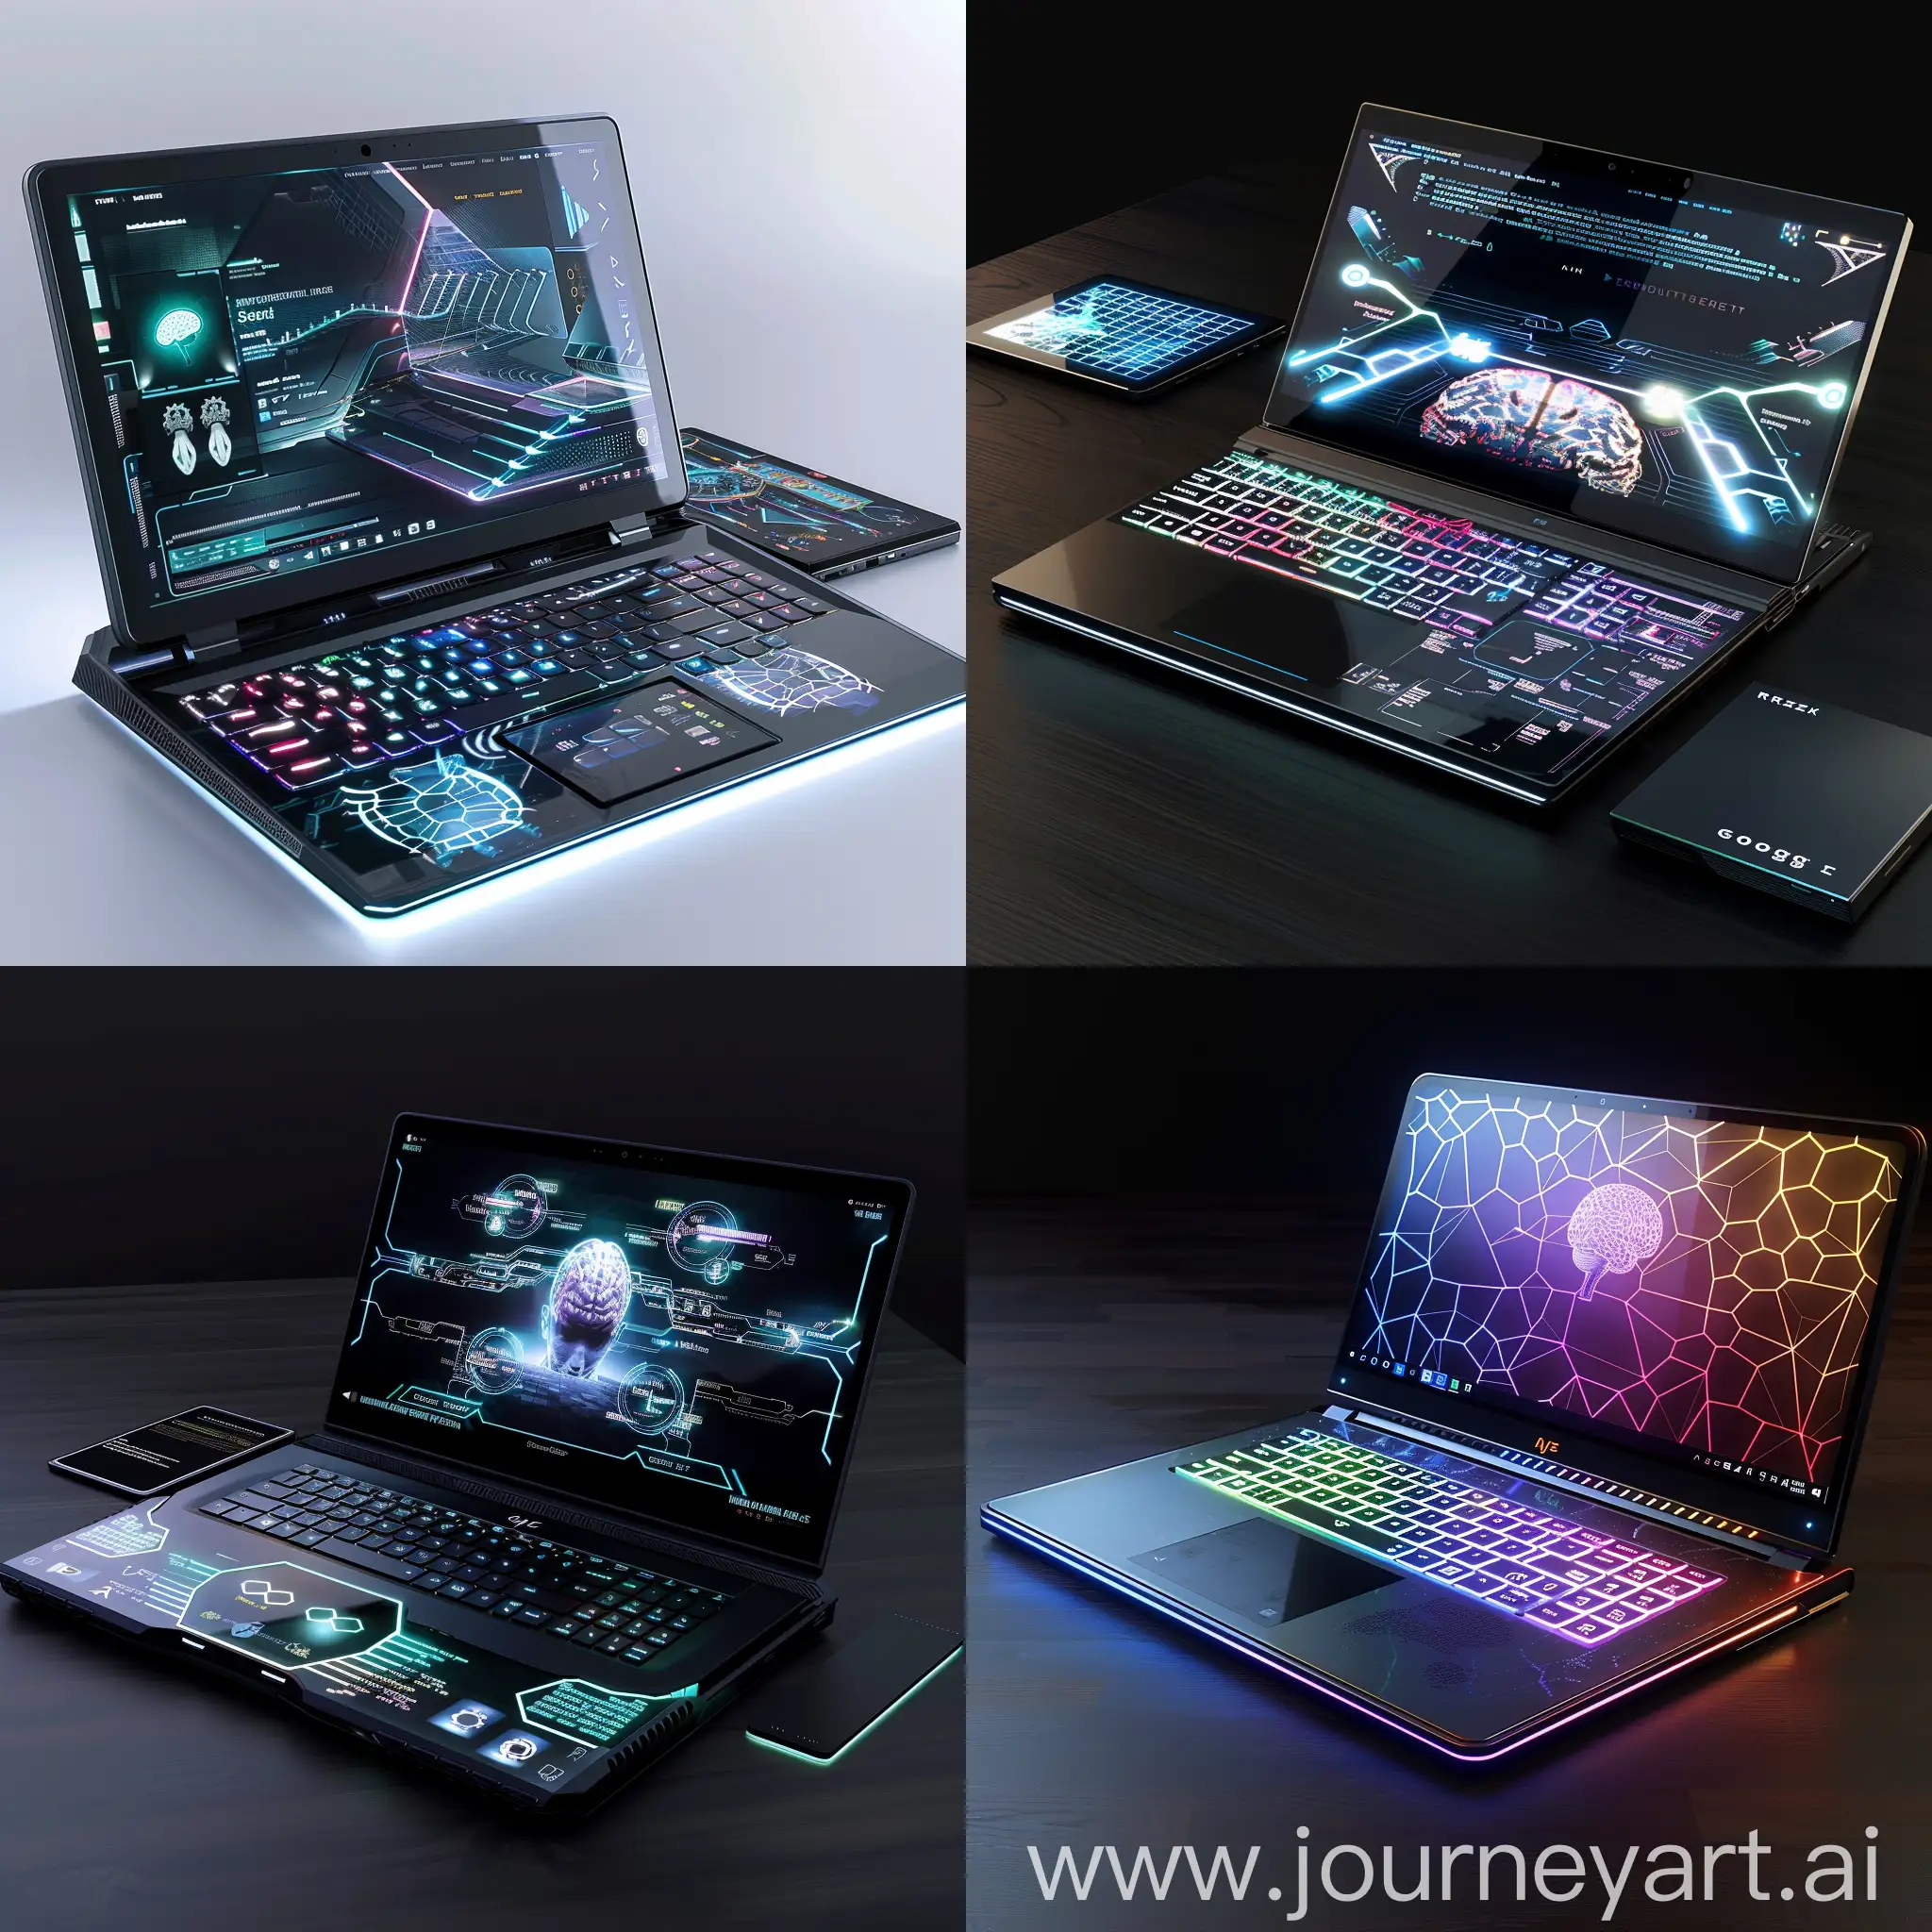 Futuristic-Laptop-with-SelfHealing-Materials-UltraFlexible-Displays-and-Ambient-Lighting